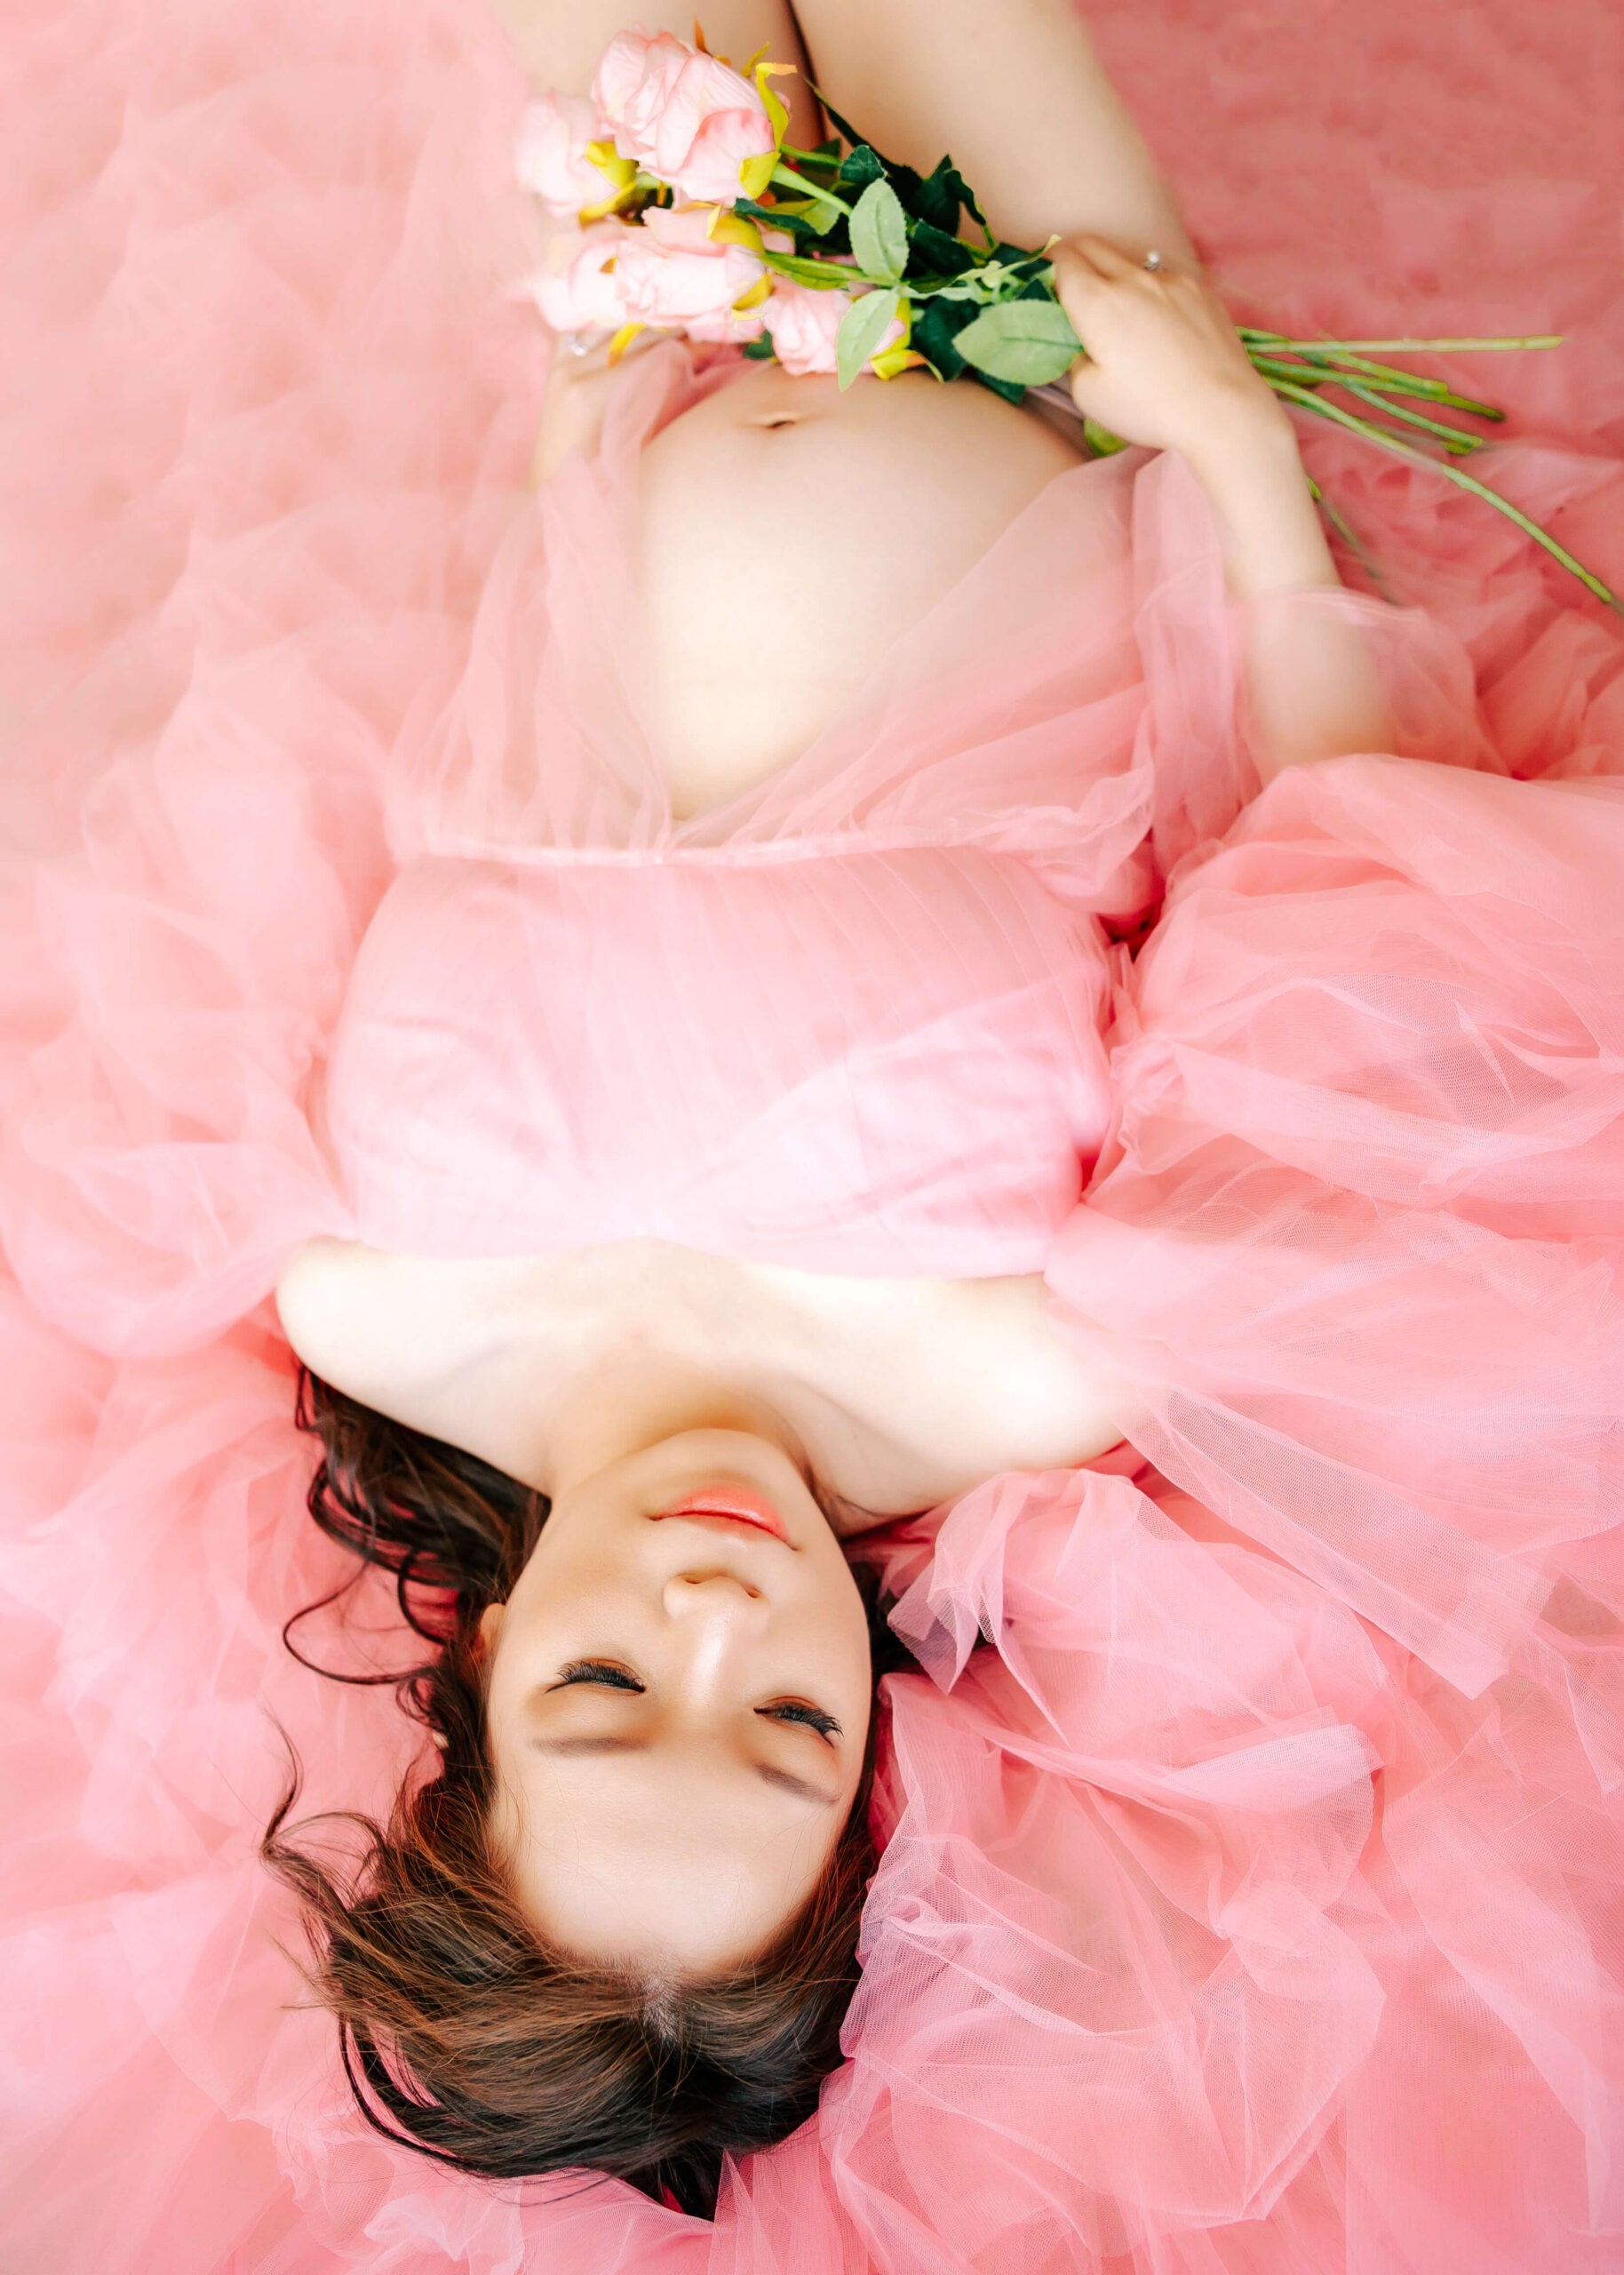 Expectant Mama laying on floor surrounded by beautiful pink tulle dress holding flowers dreaming of her baby in Orange County, CA studio by Ashley Nicole.